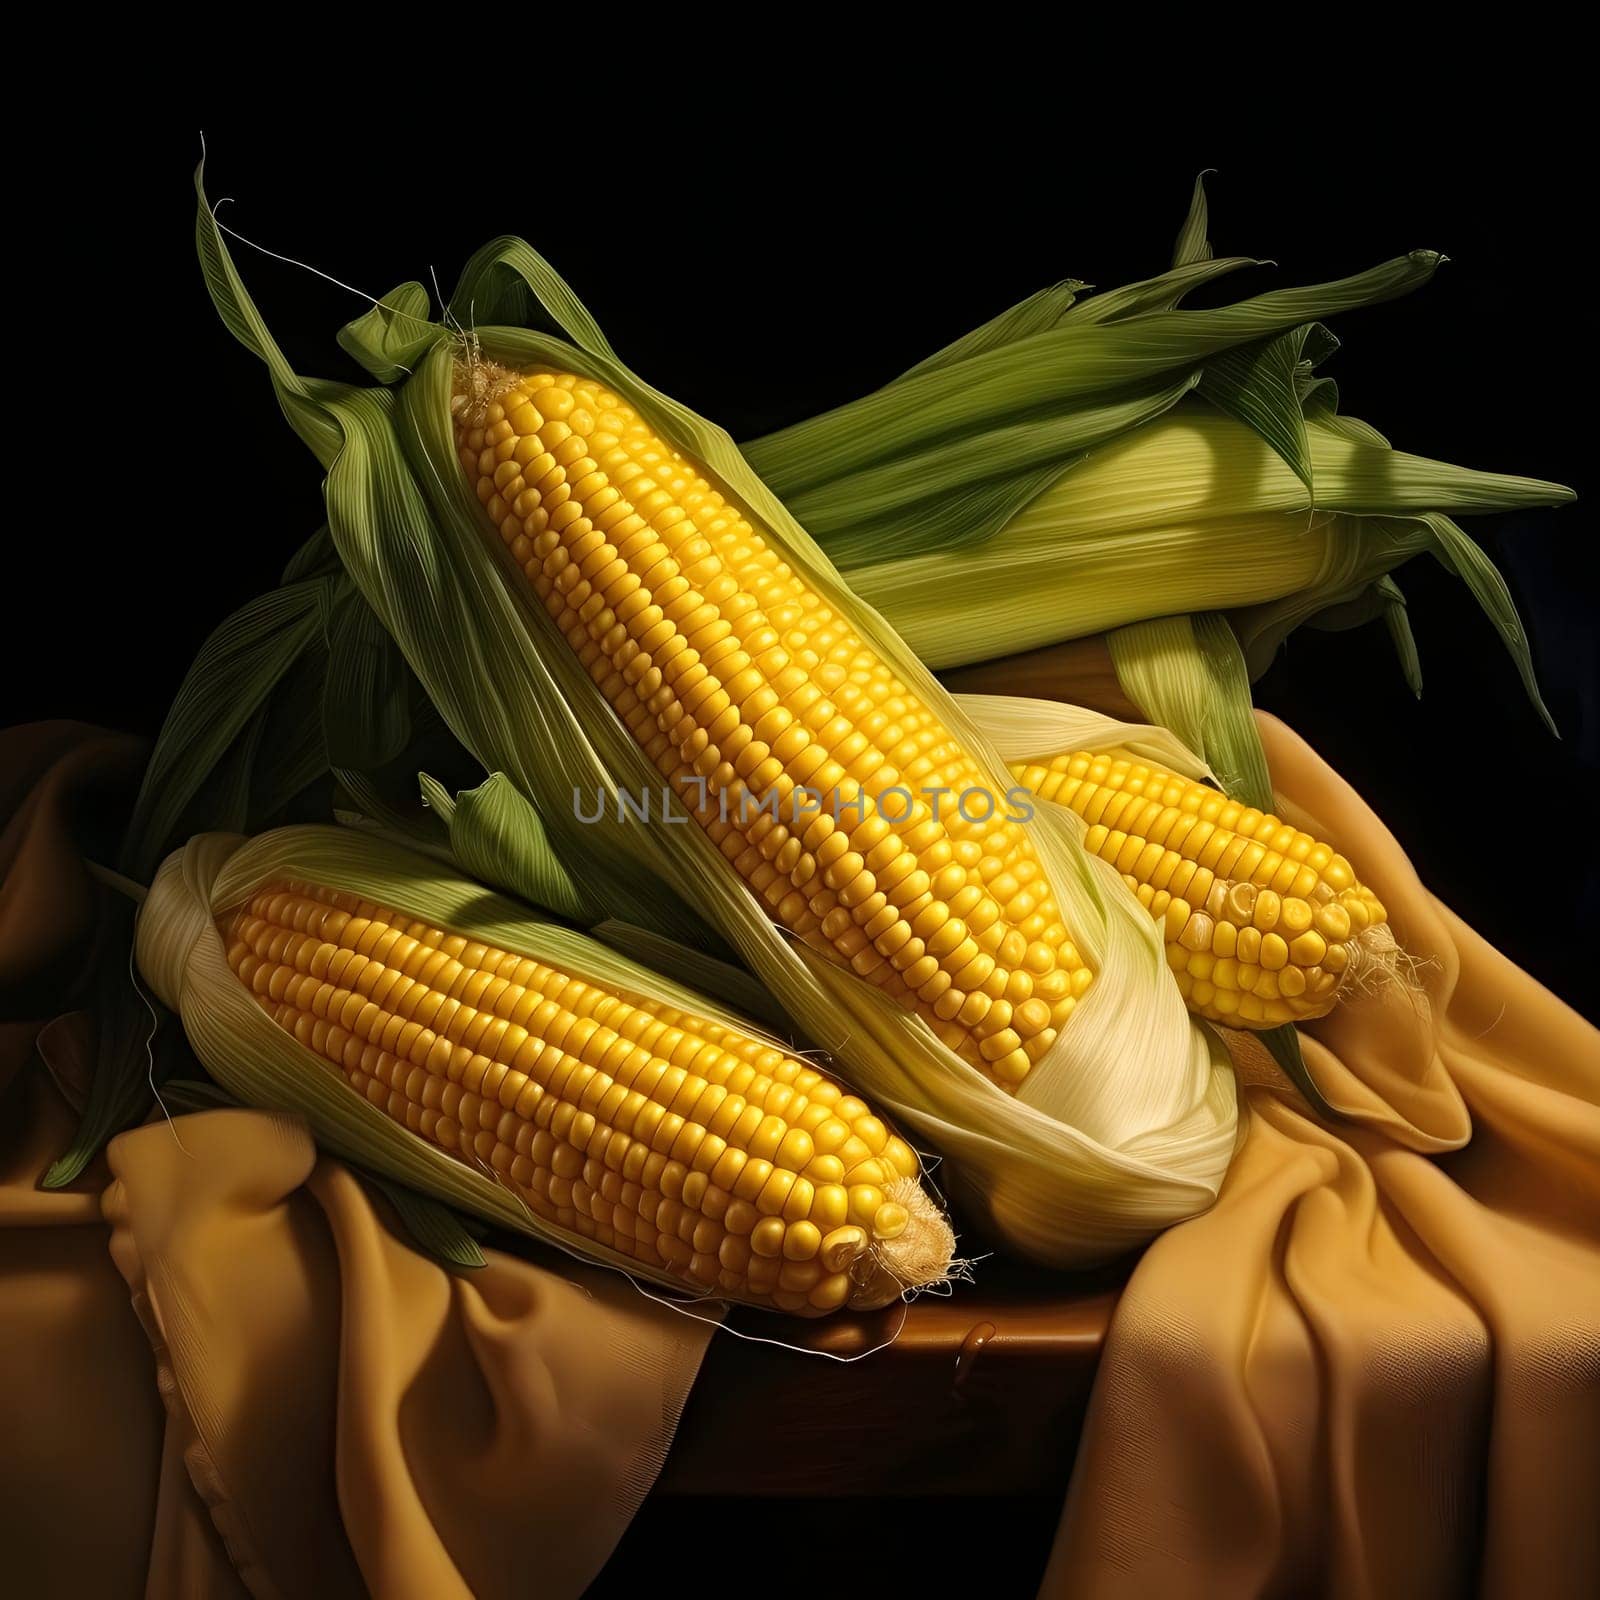 Three elegantly laid yellow corn cobs on a dark background. Corn as a dish of thanksgiving for the harvest. An atmosphere of joy and celebration.